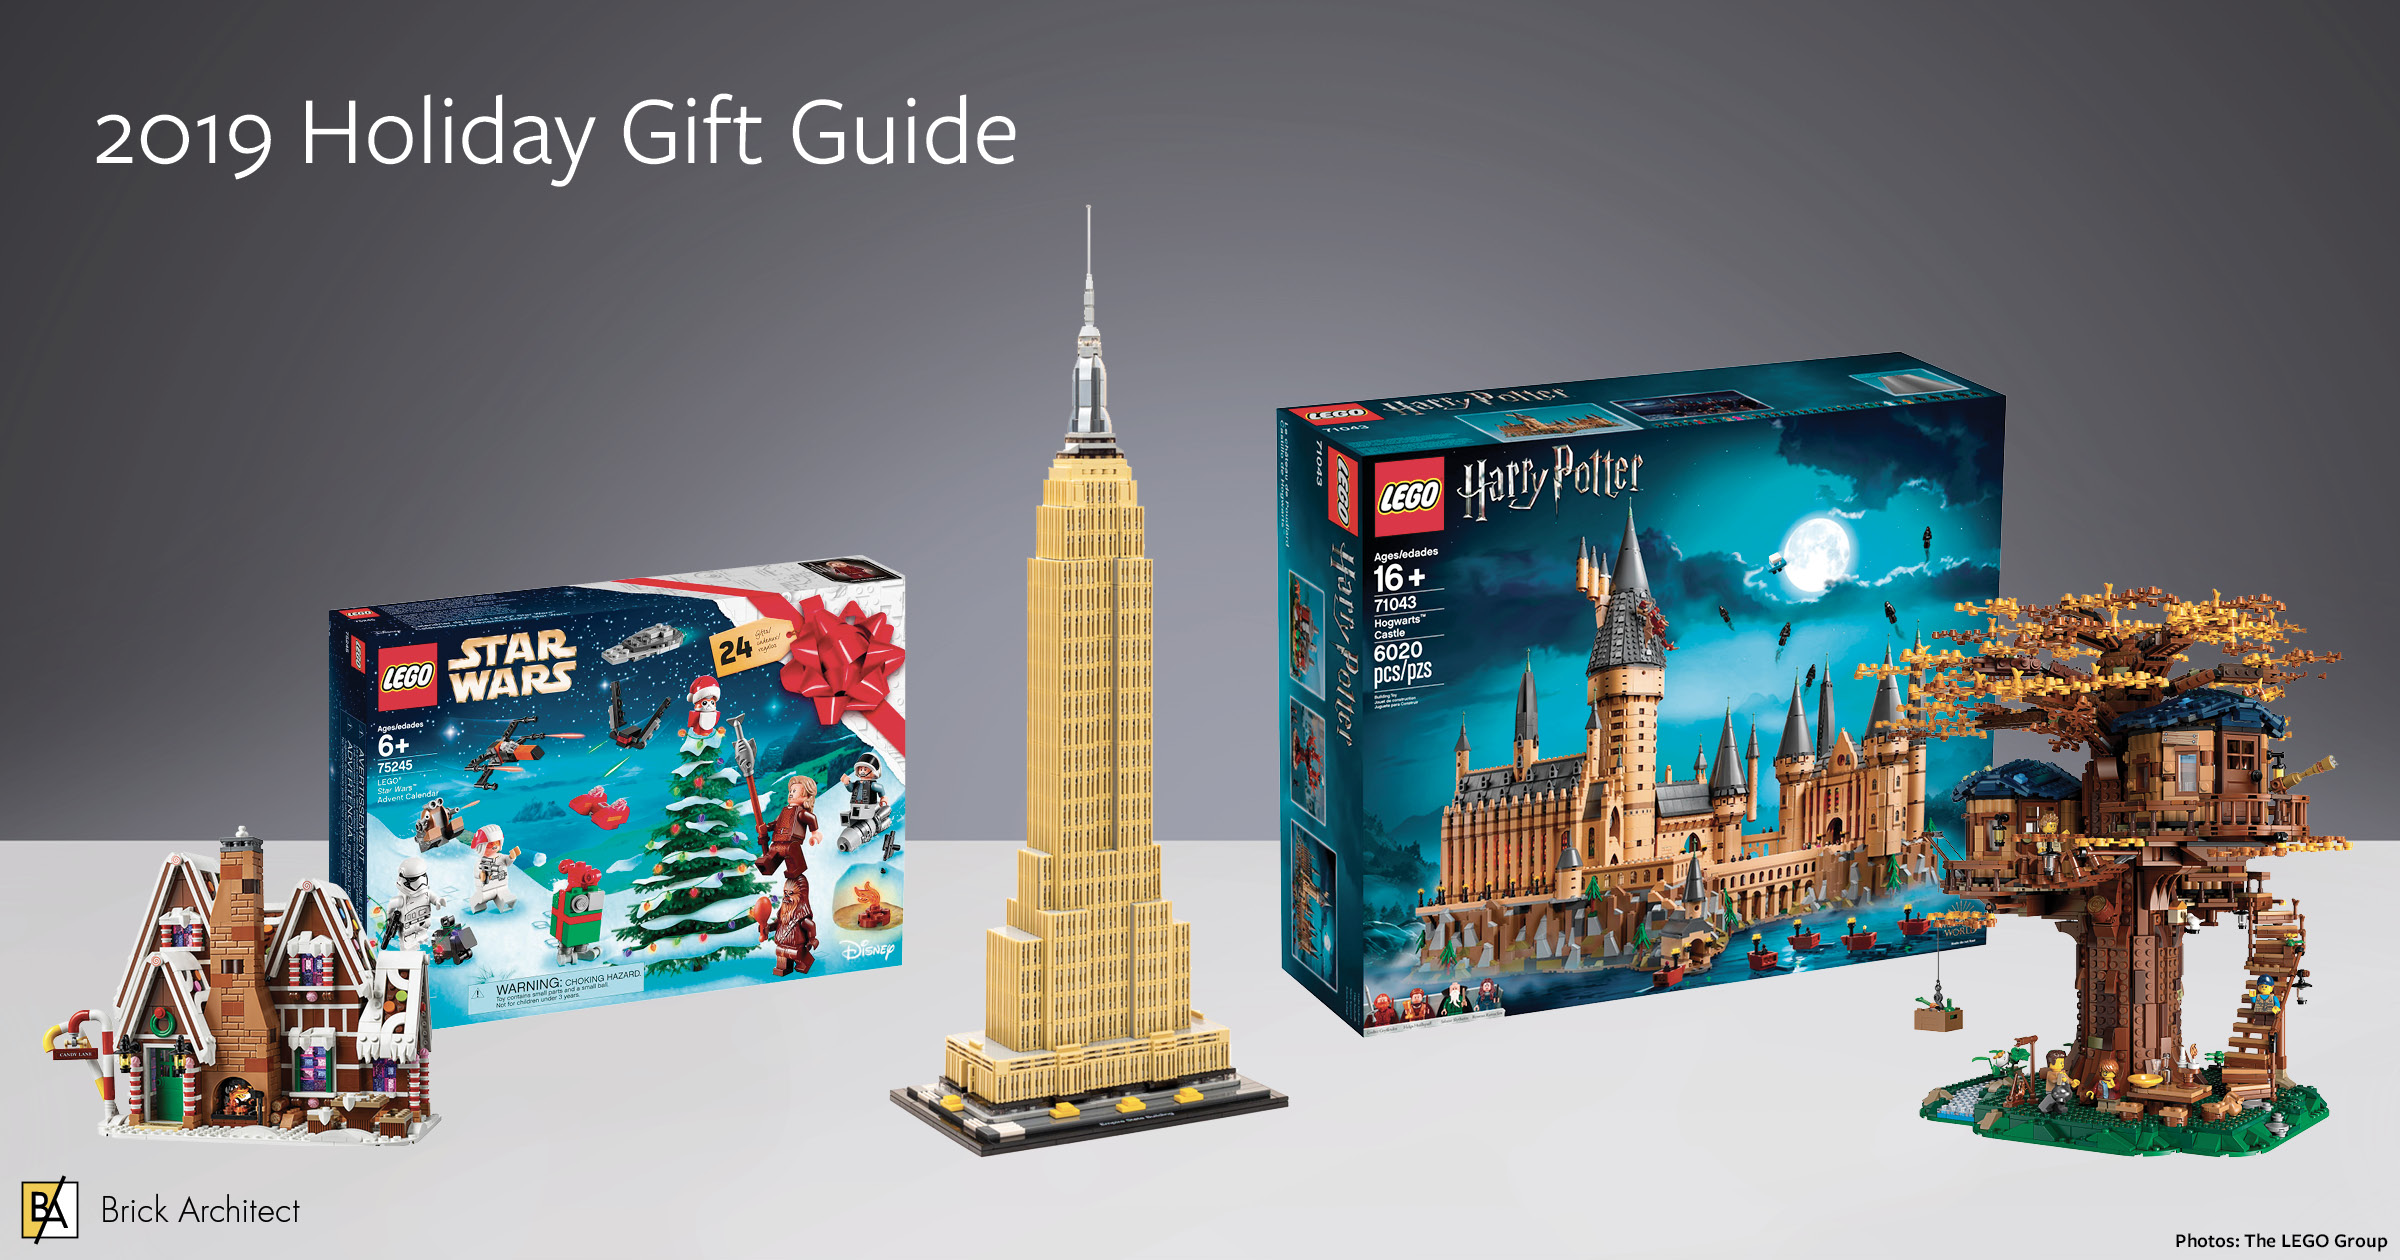 Mob Credential krone Brick Architect's 2019 Holiday Gift Guide - BRICK ARCHITECT